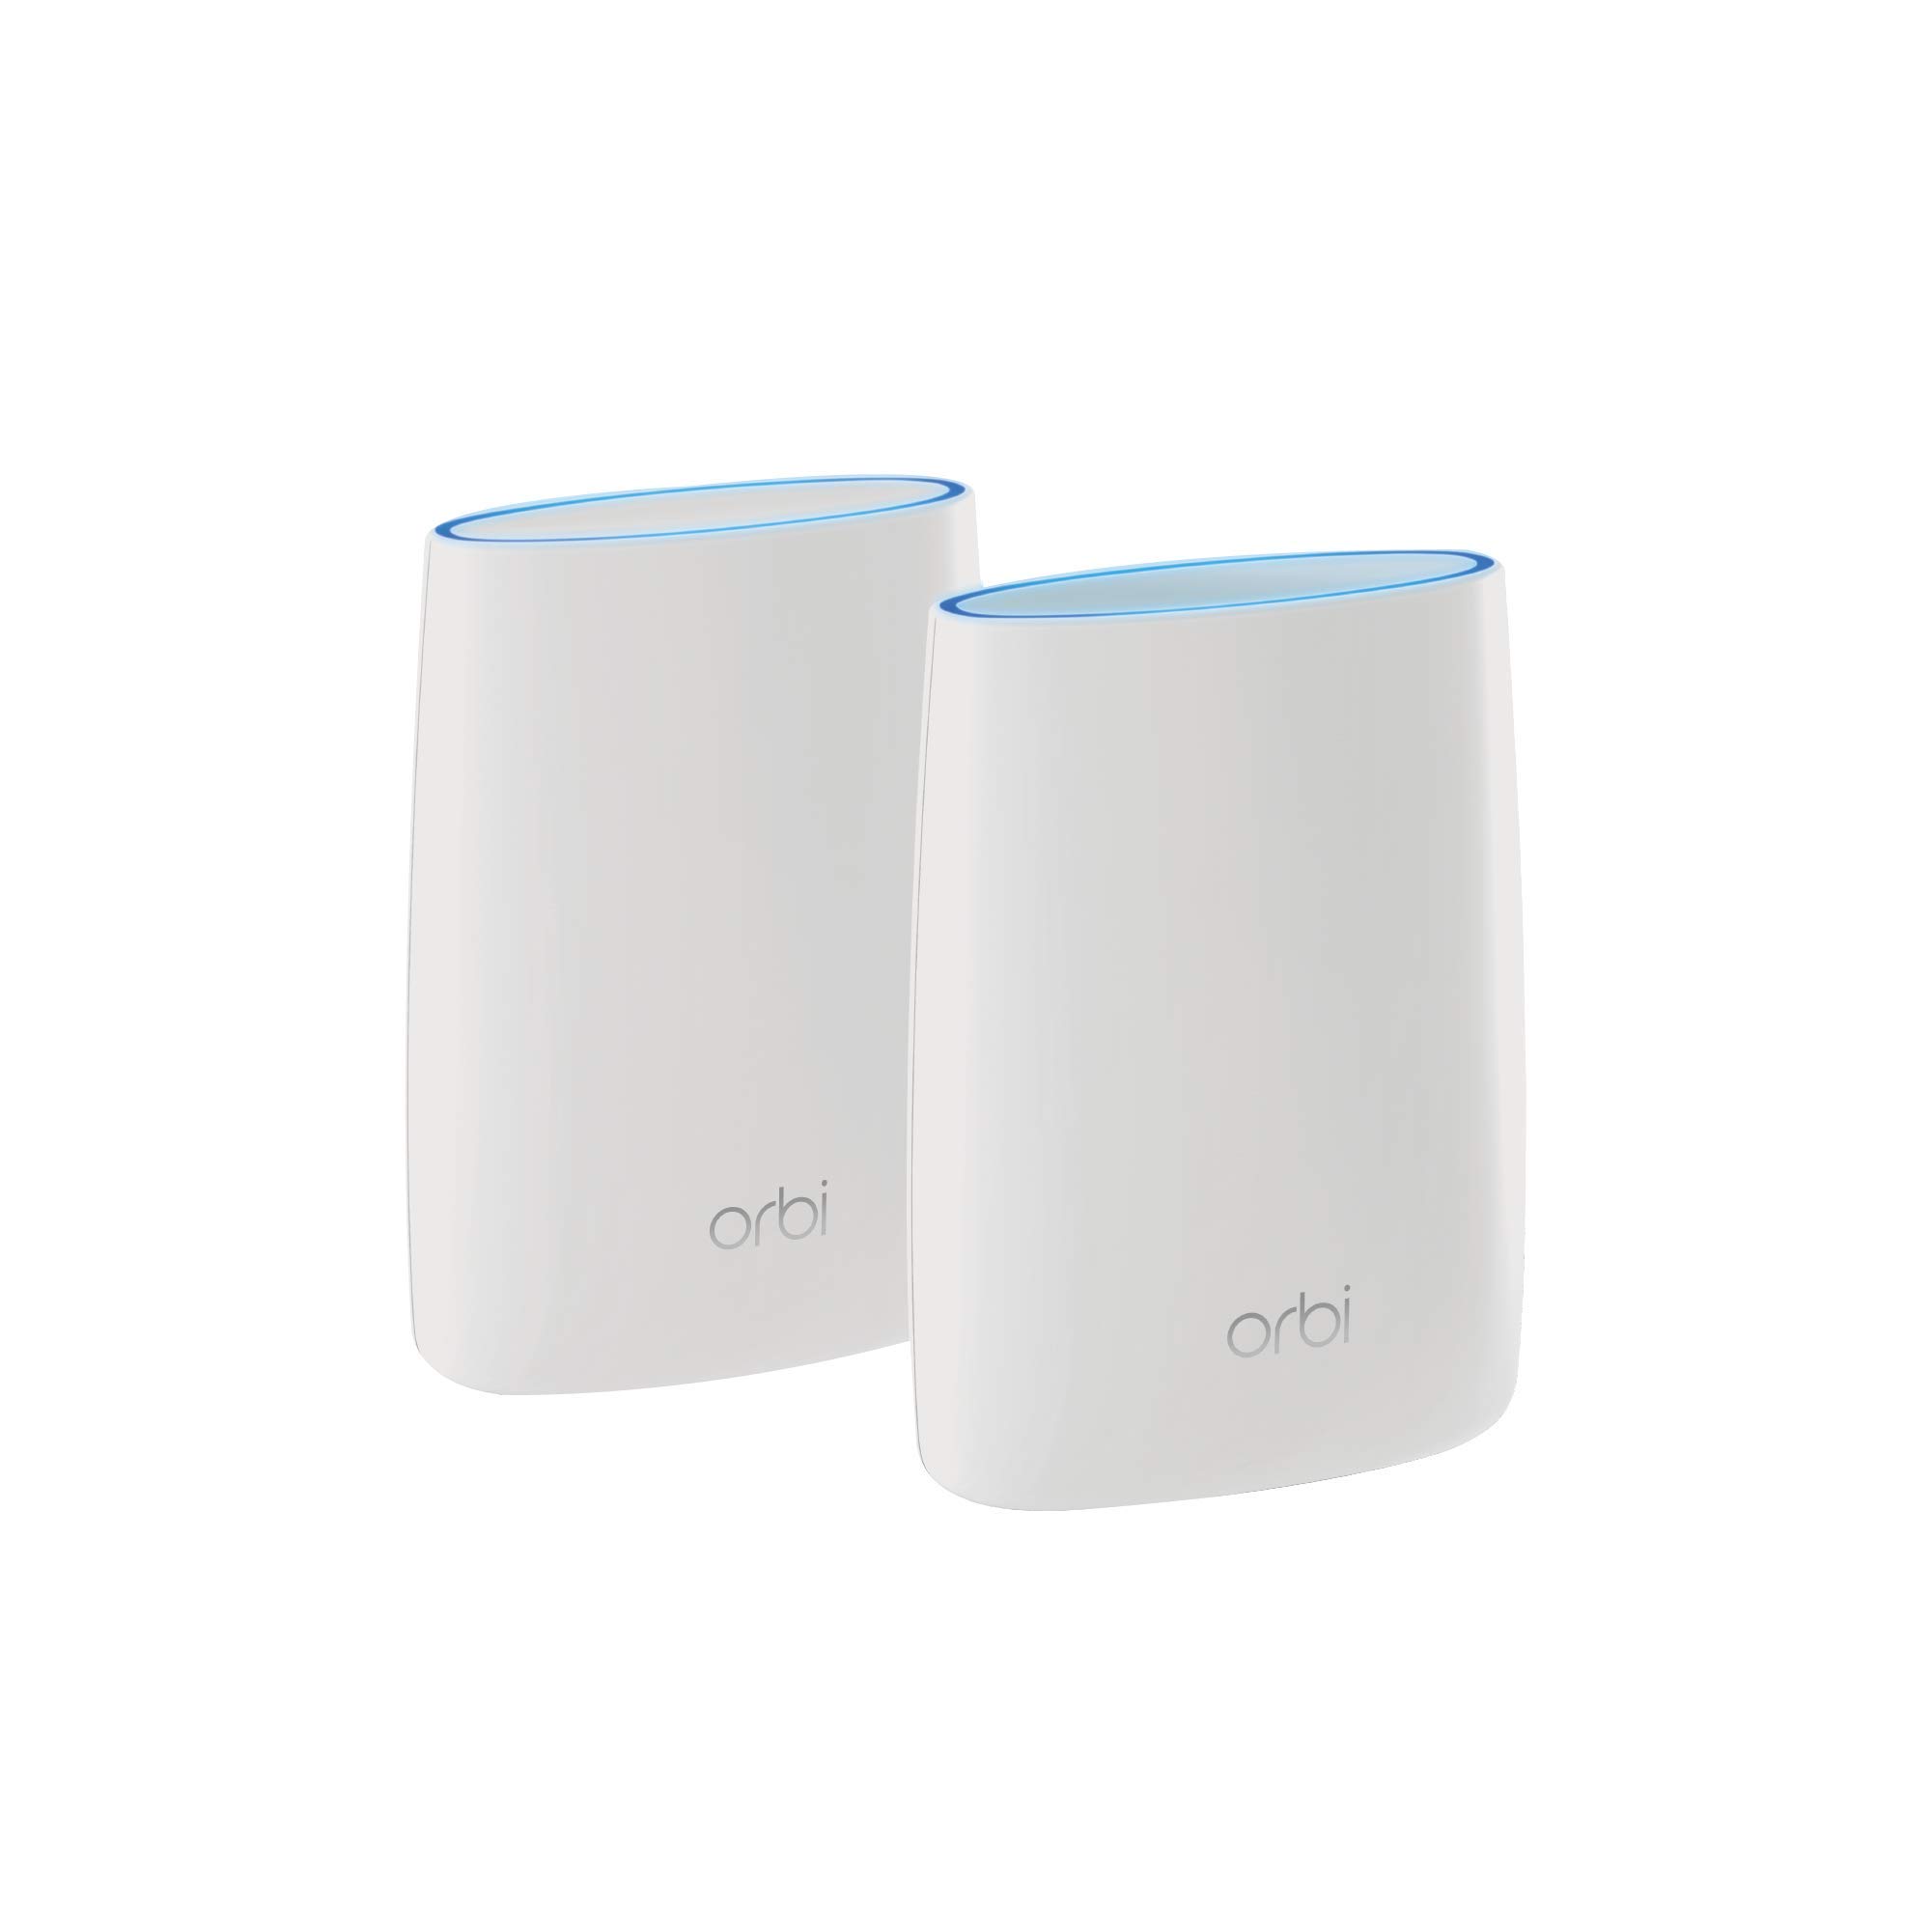 Netgear Orbi Tri-Band Whole Home Mesh WiFi System with 3Gbps Speed (RBK50) – Router & Extender Replacement Covers Up to 5,000 sq. ft, 2-Pack Includes 1 Router & 1 Satellite White